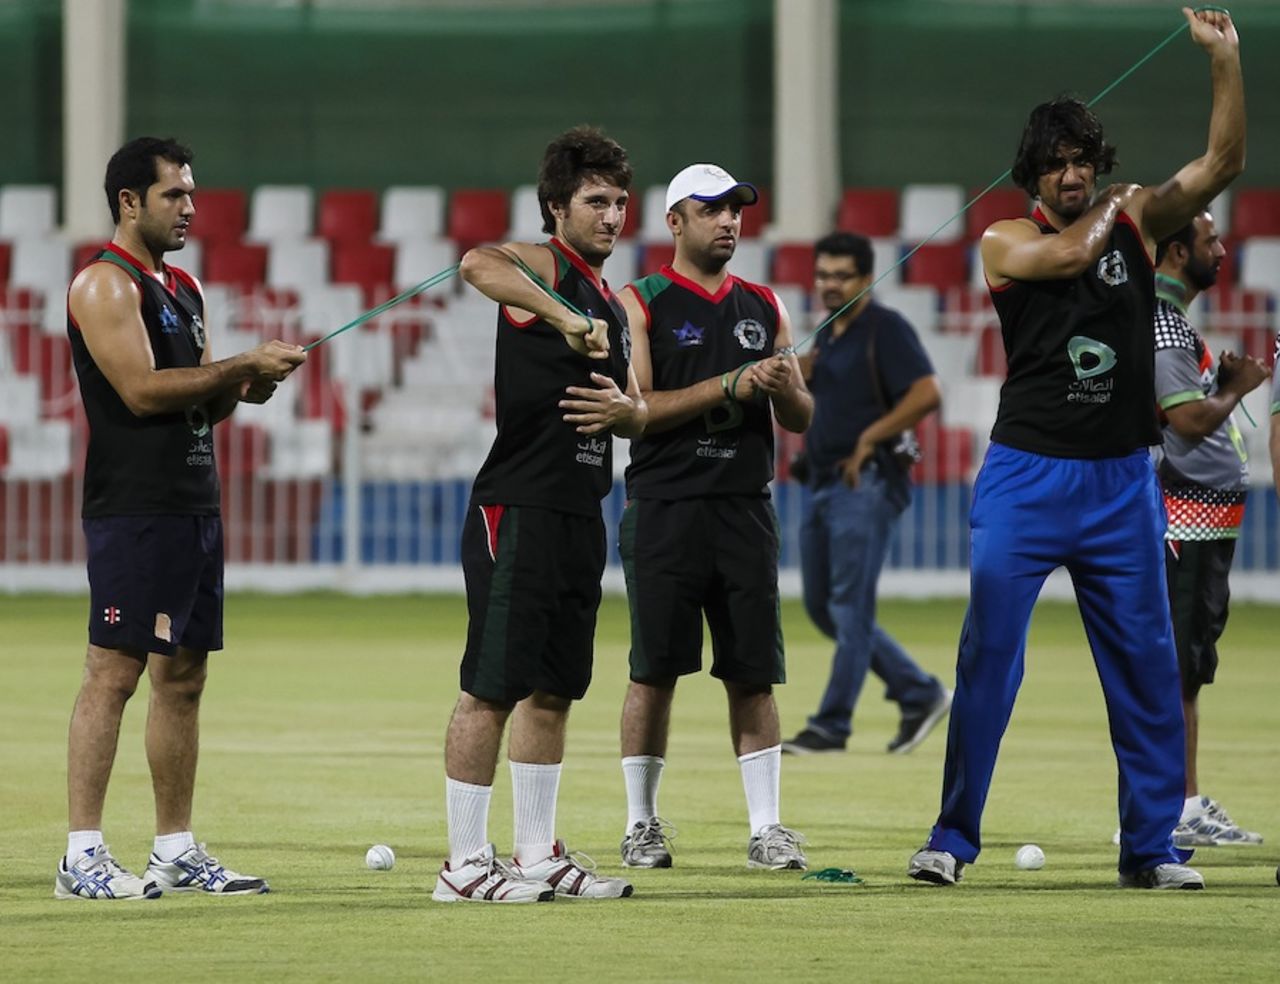 Afghanistan players in a practice session, Sharjah, August 23, 2012